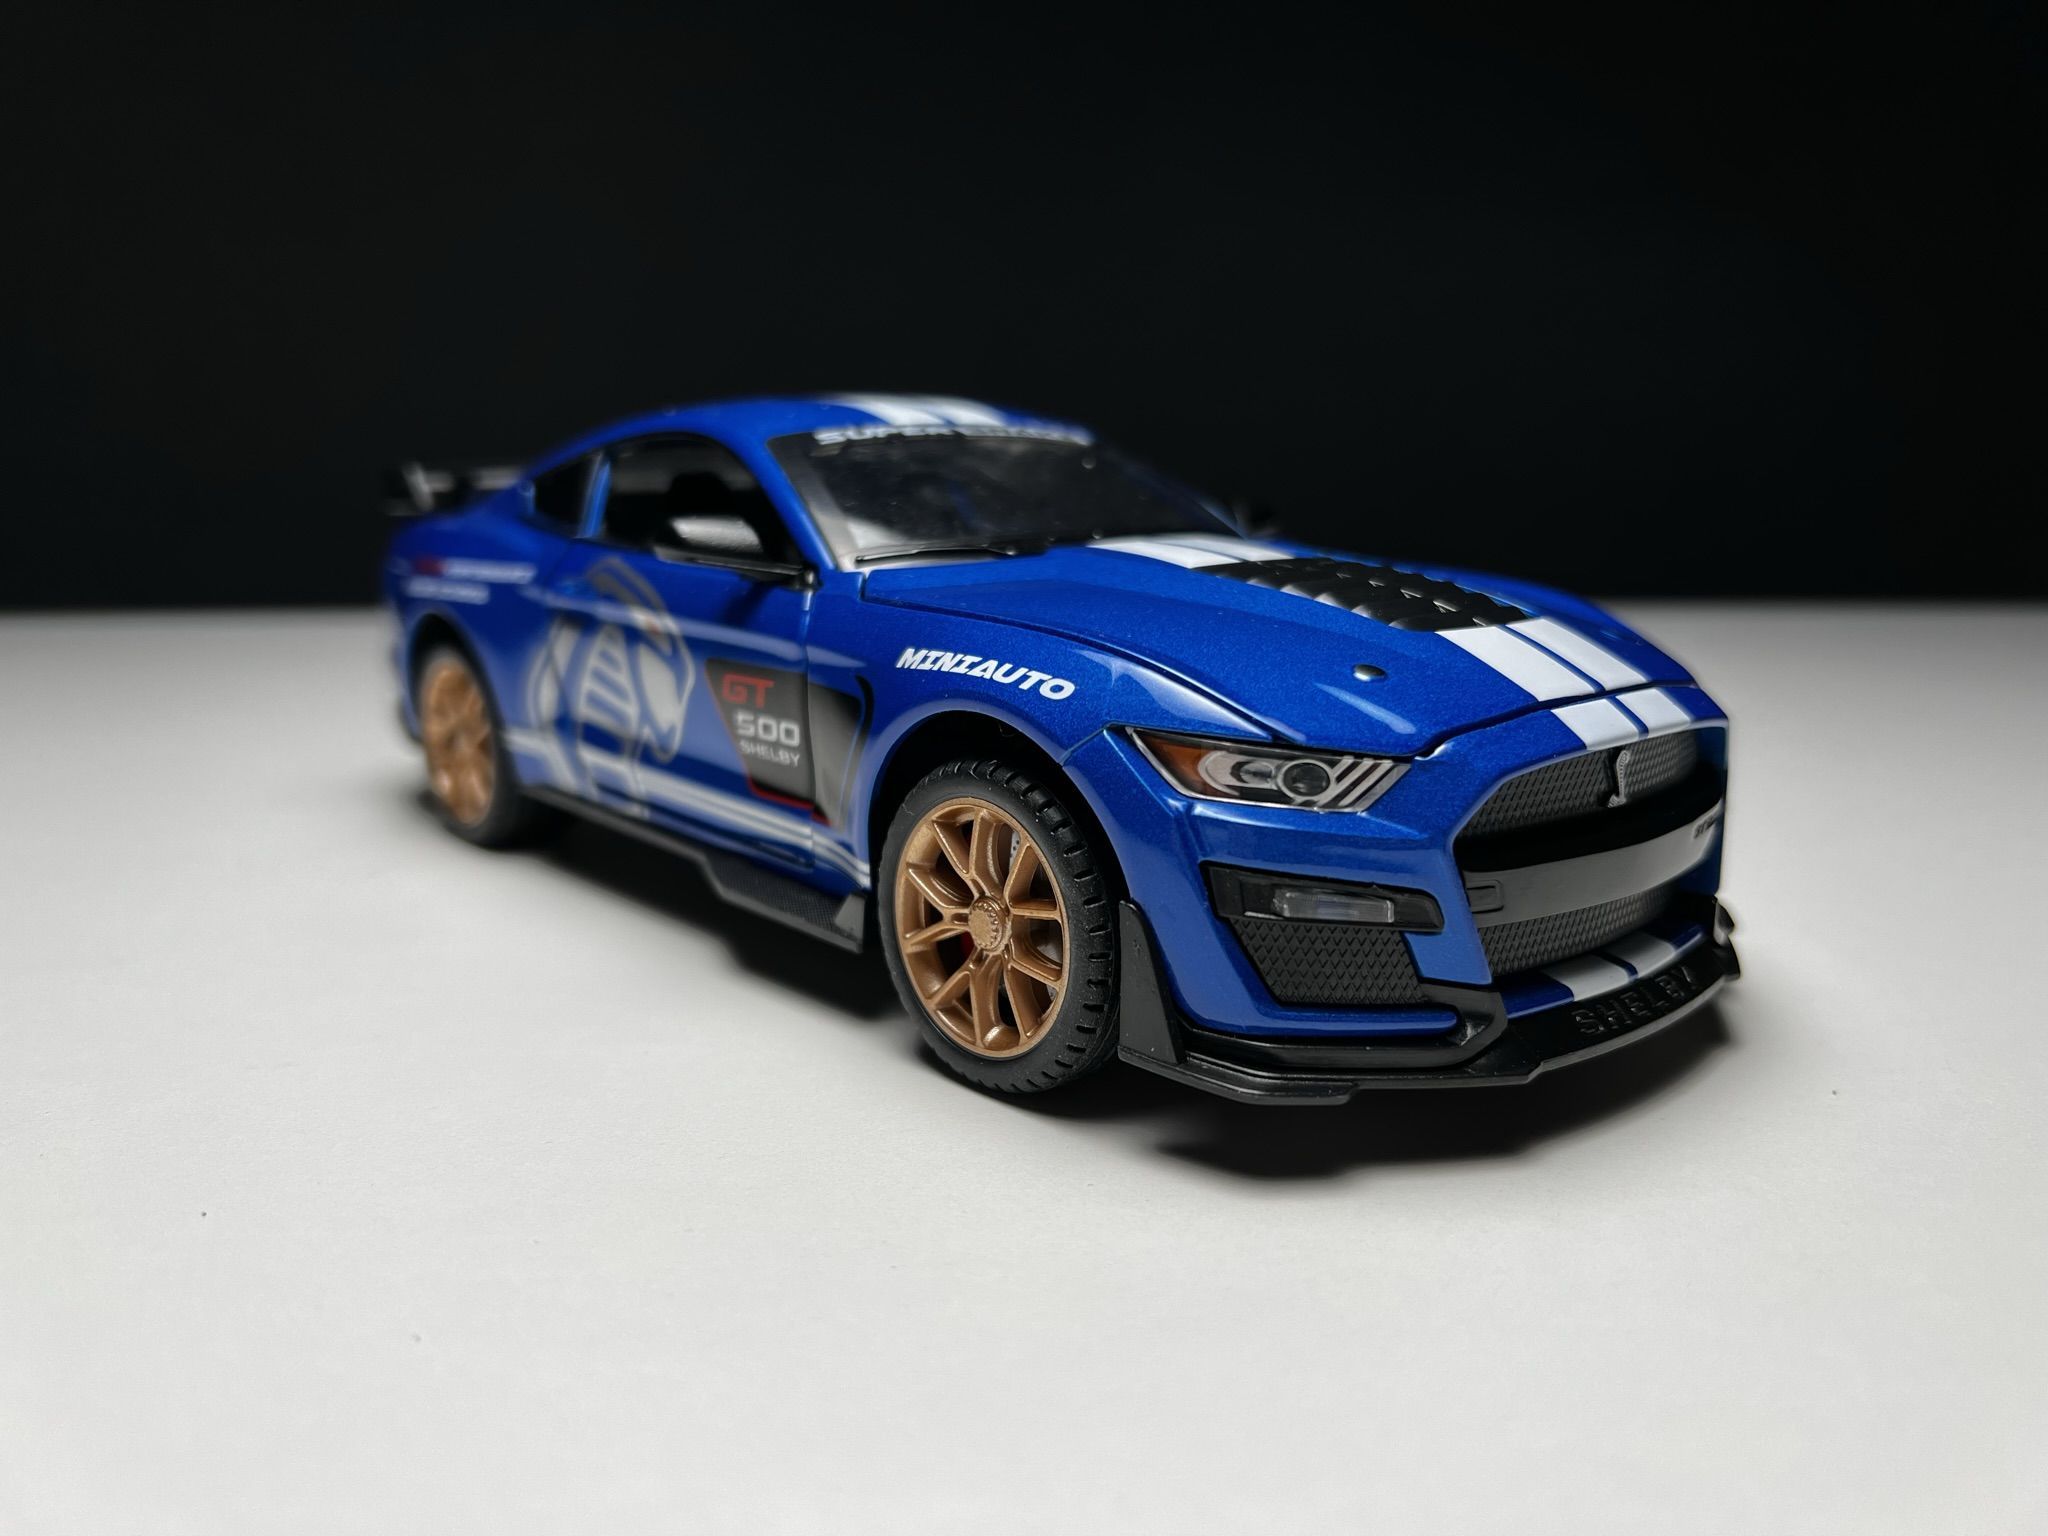 Машинка металлическая Элемент Ford Mustang Shelby 1:24 игрушечная машинка bburago металлическая 1 32 2020 mustang shelby gt500 18 43000